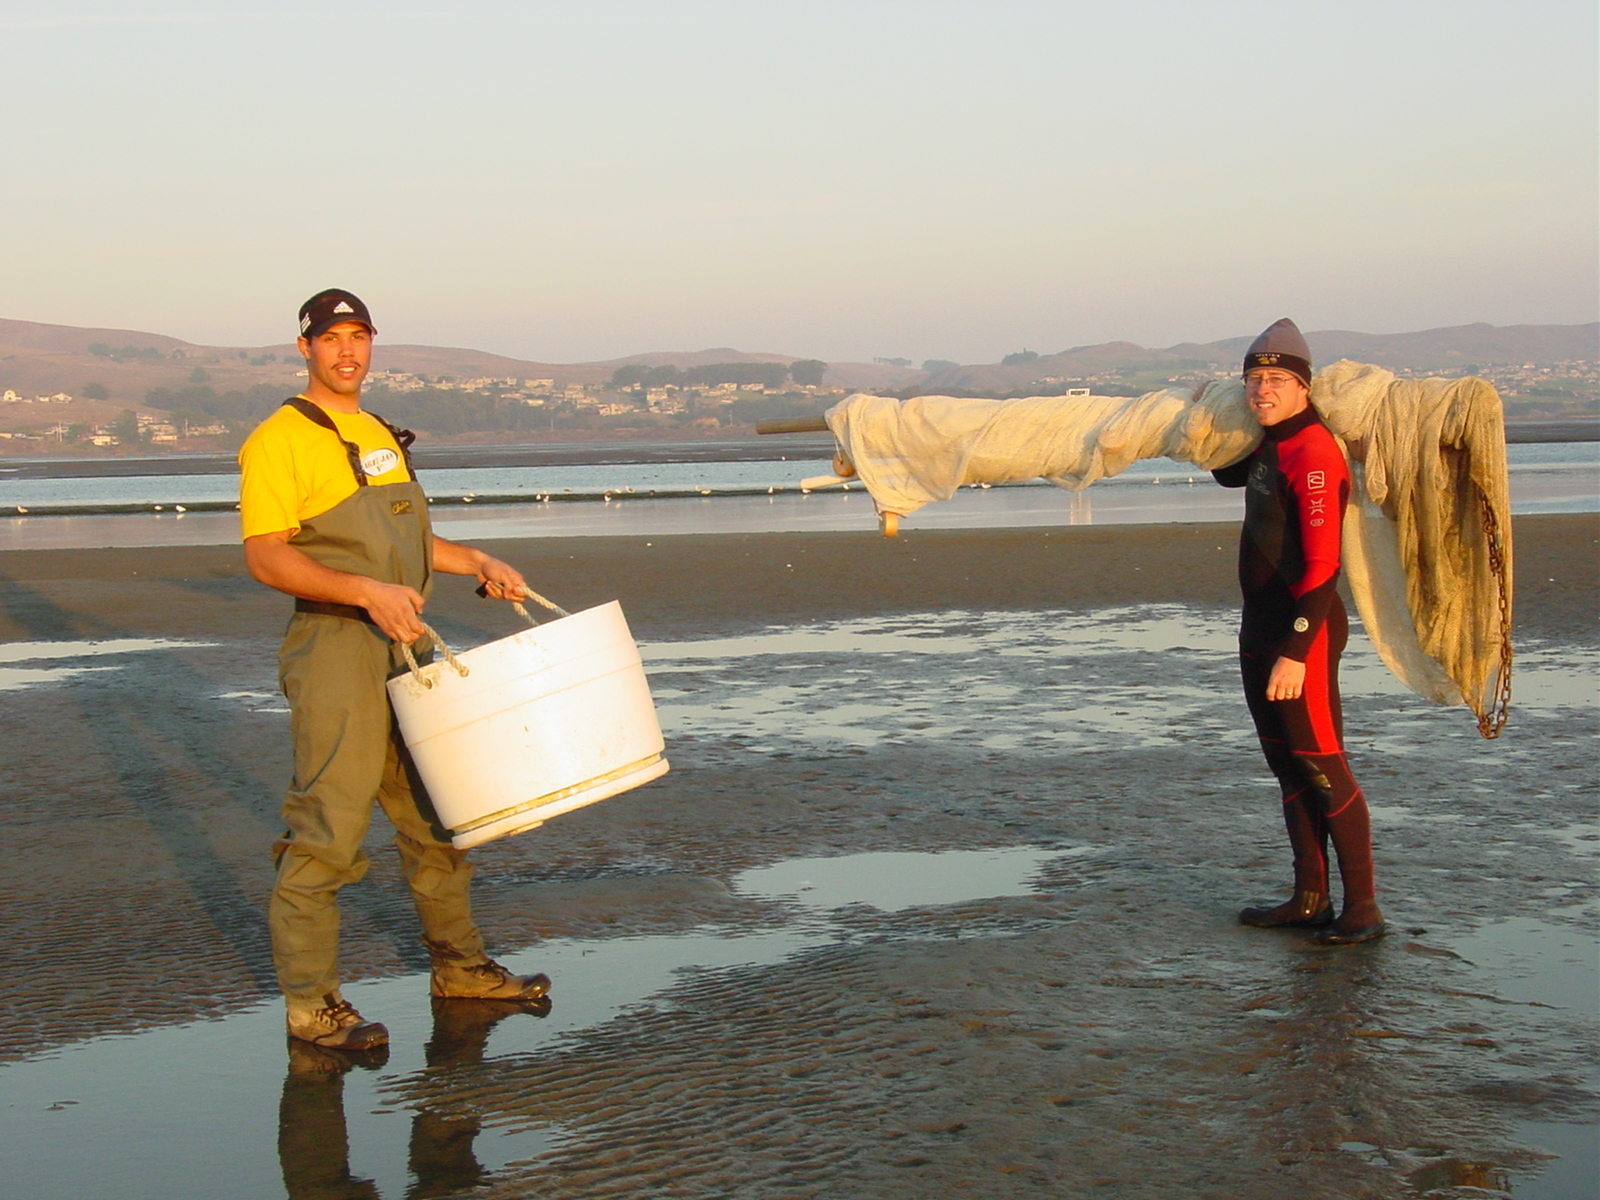 Levi Lewis as a UC Davis undergraduate researcher in 2002 with mentor Jim Hobbs studying rockfish and seagrass beds in Bodega Bay, California. (Courtesy Levi Lewis)